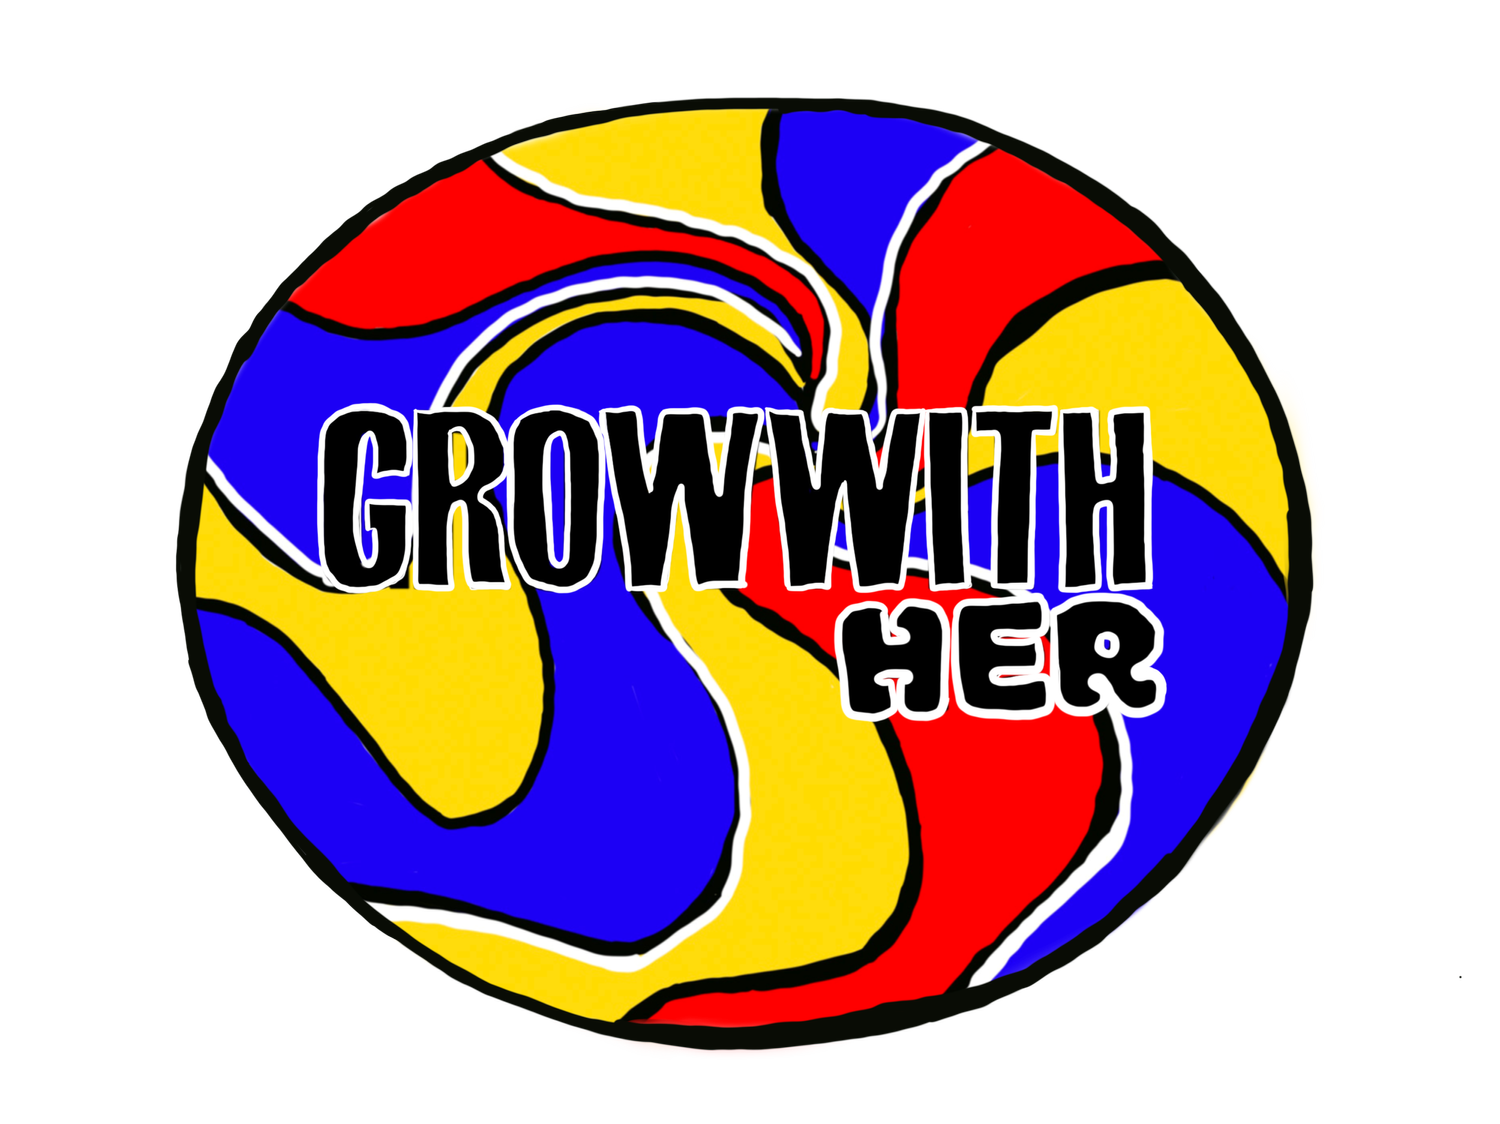 Grow with her